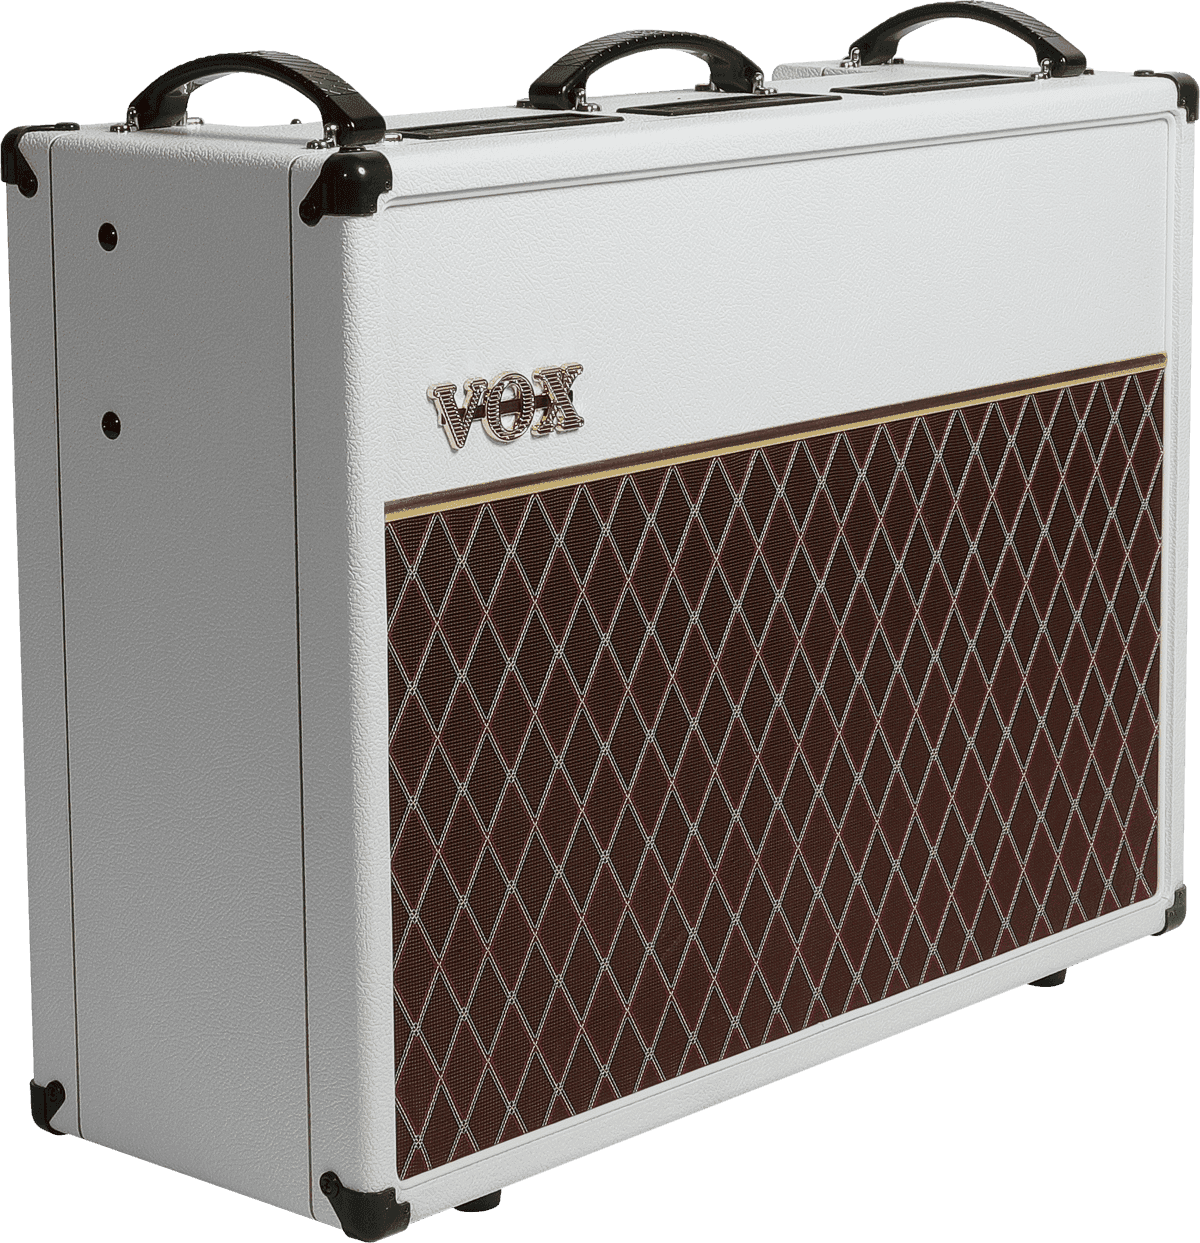 Vox Ac30c2 Limited Edition White Bronco 30w 2x12 - Electric guitar combo amp - Variation 1